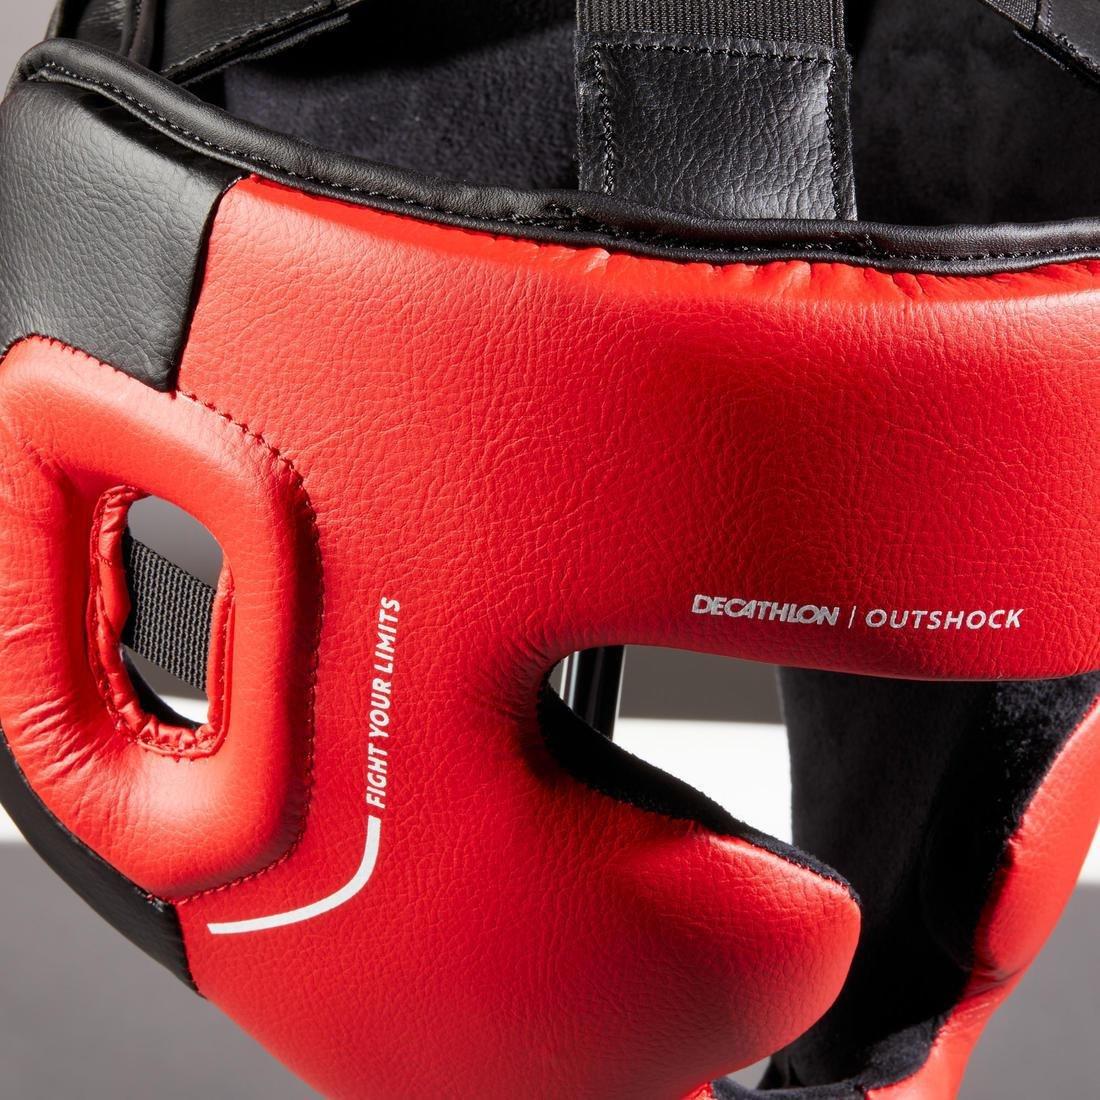 OUTSHOCK - Kids Unisex Boxing Full Face Headguard - 500, Red